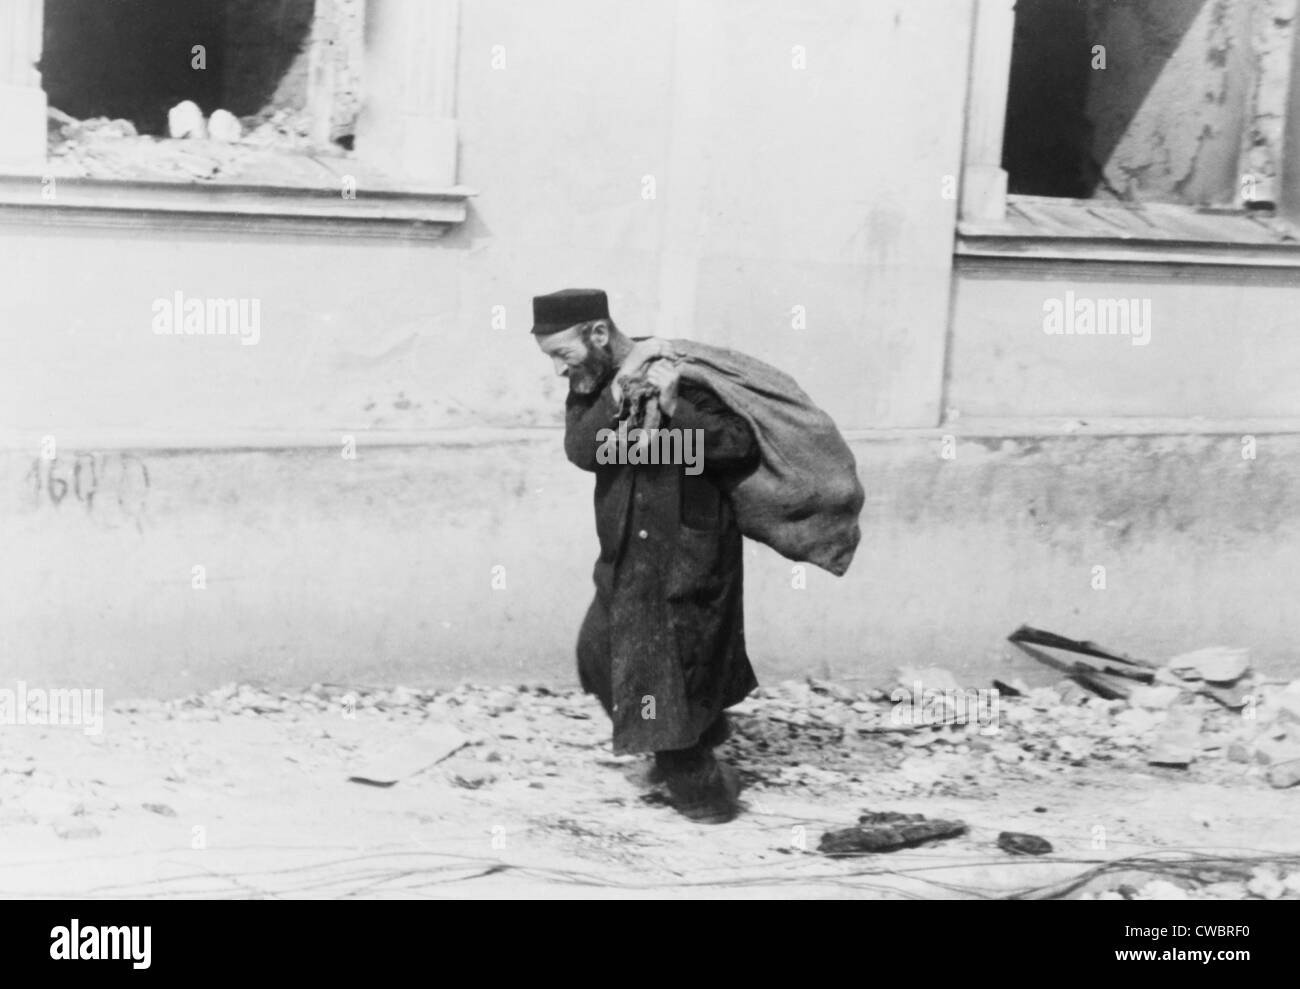 A solitary Jewish man carrying a sack walking past bomb damaged buildings in Poland in the early days of World War II. 1939-40. Stock Photo